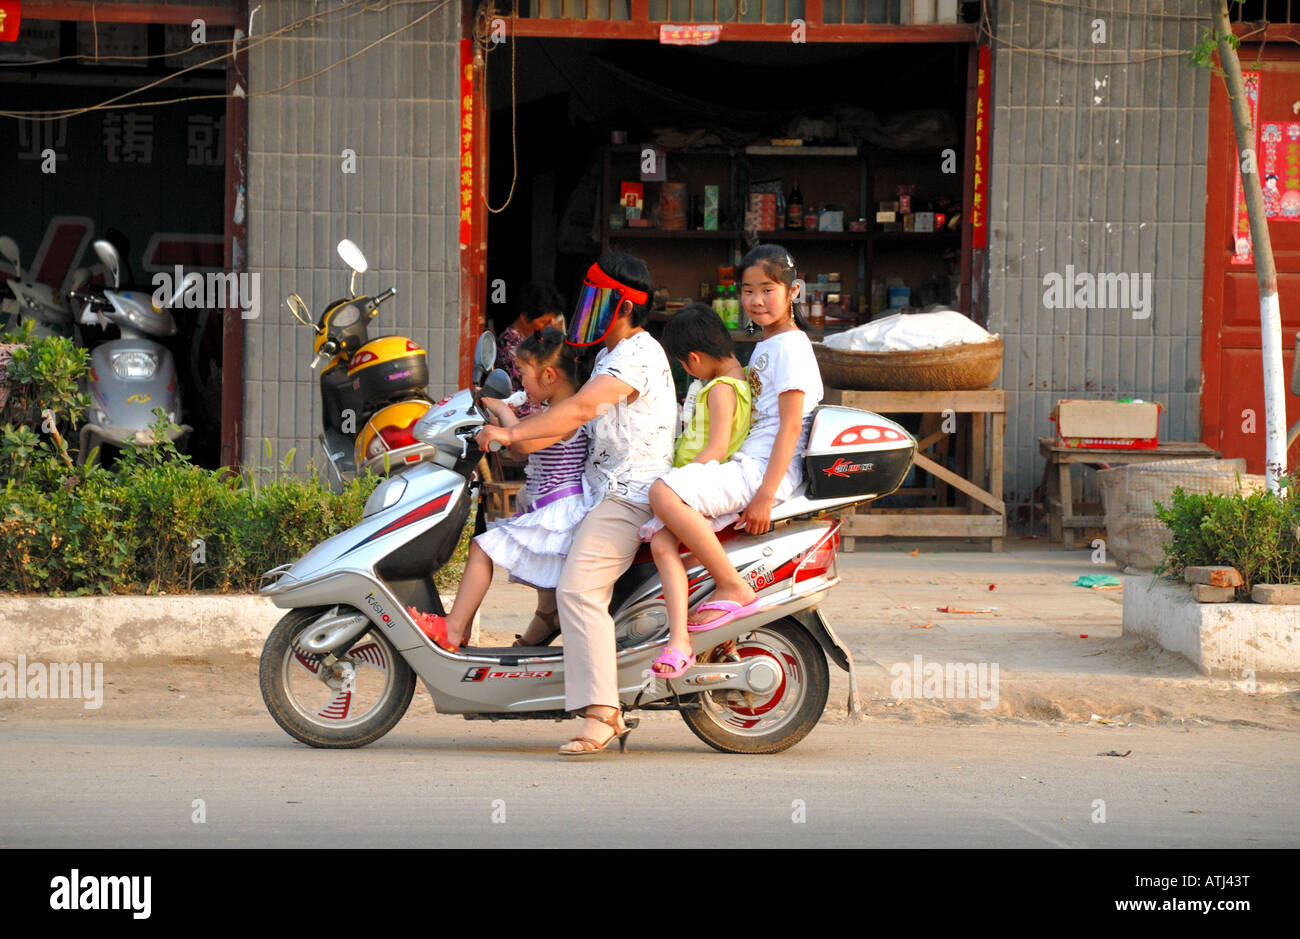 Four people moving off on a scooter on road by Taiqing Palace Square  Kaifeng Henan Province China Asia Stock Photo - Alamy